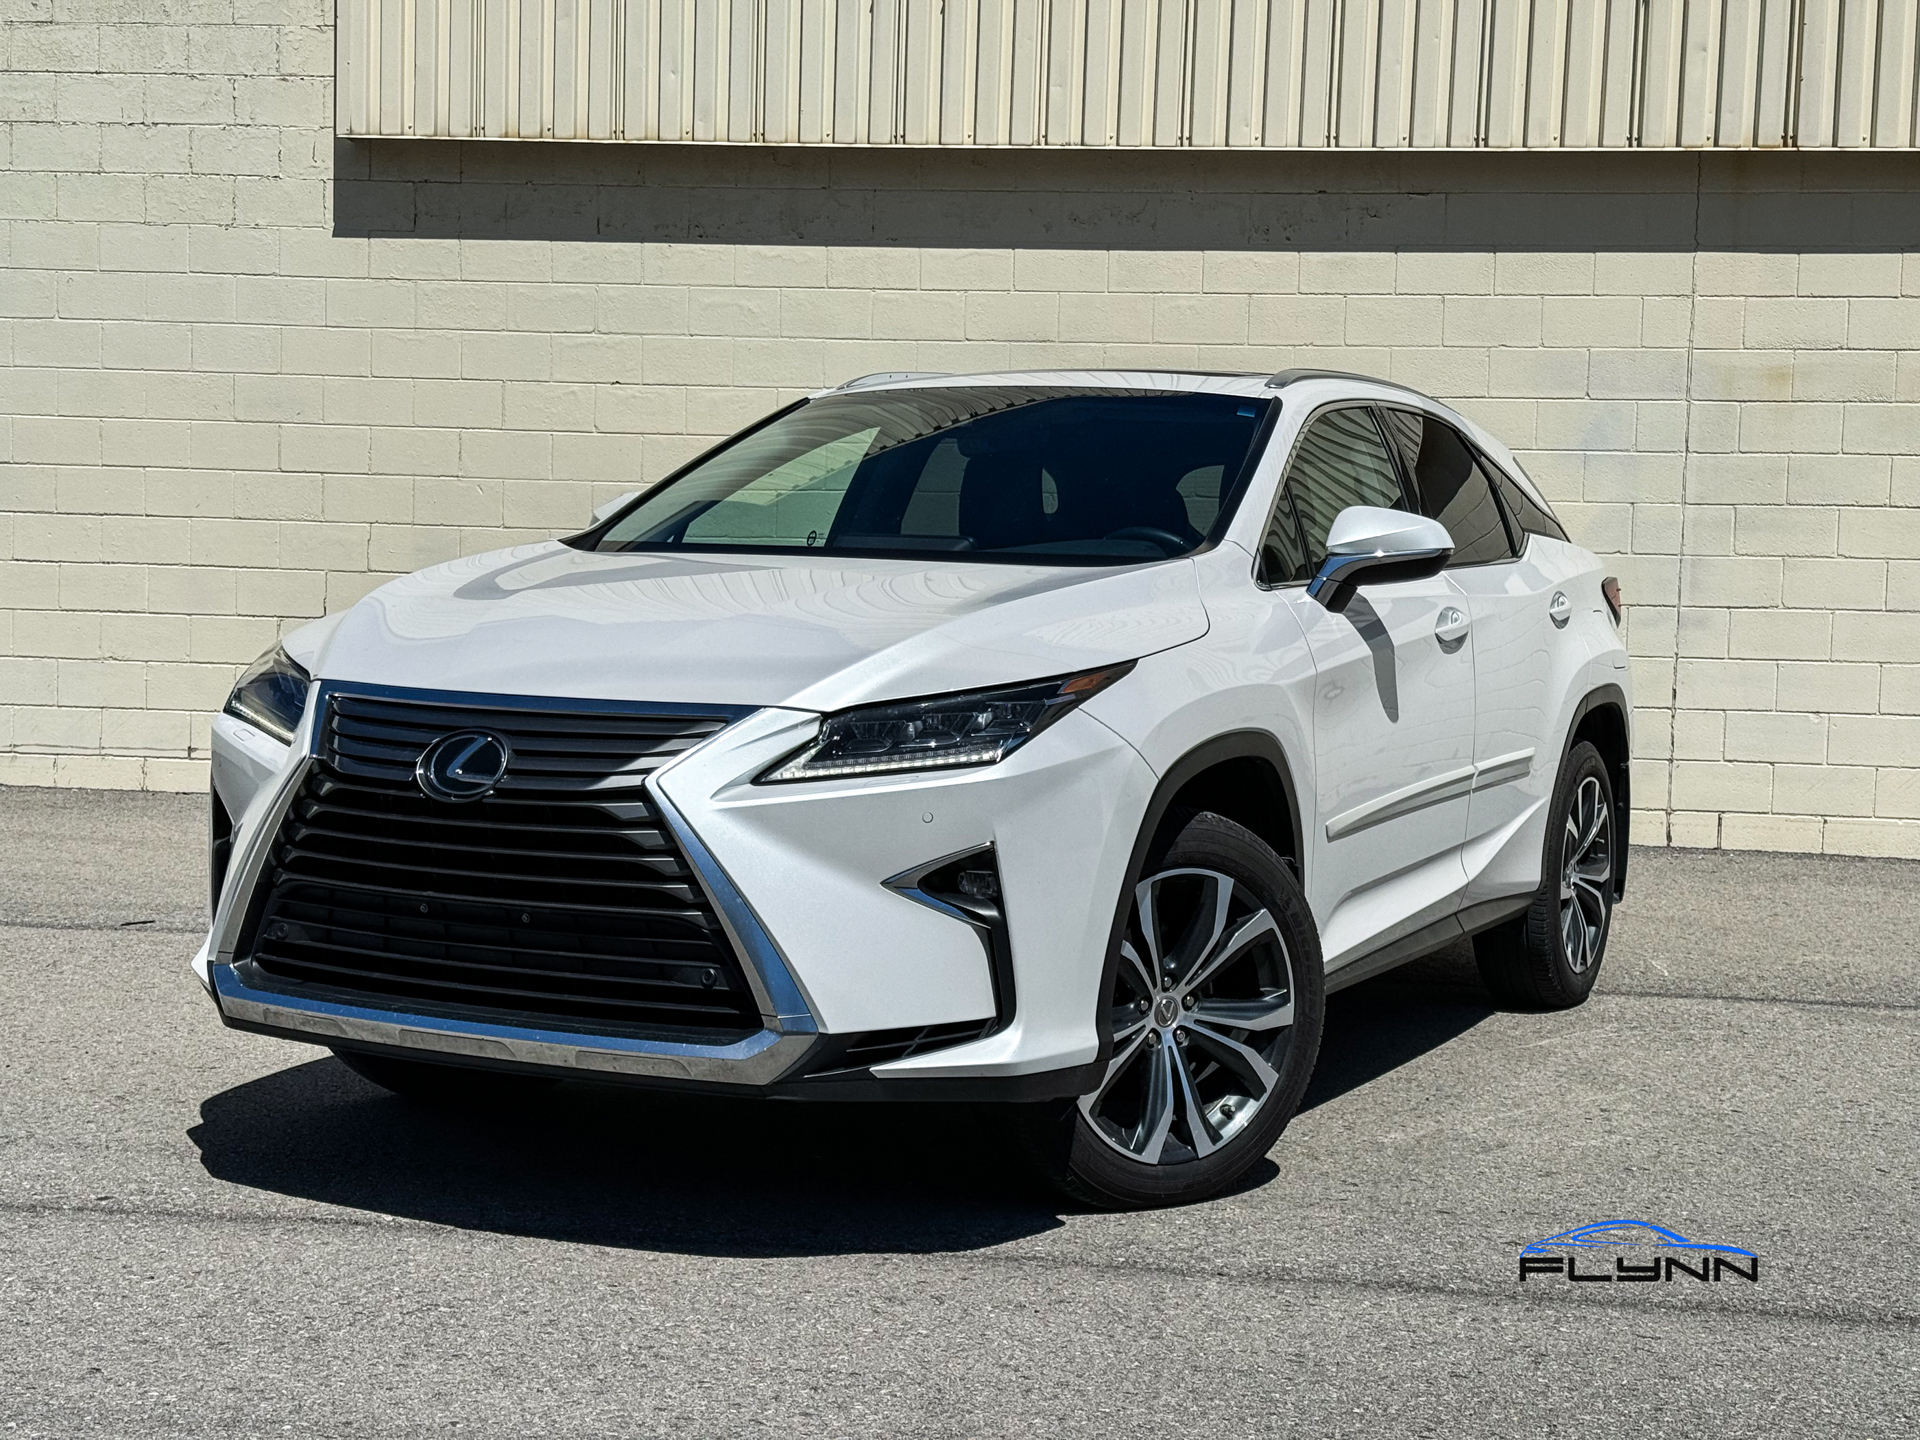 2017 Lexus RX 350 AWD Extended Warranty, Winter Tire Package Incl